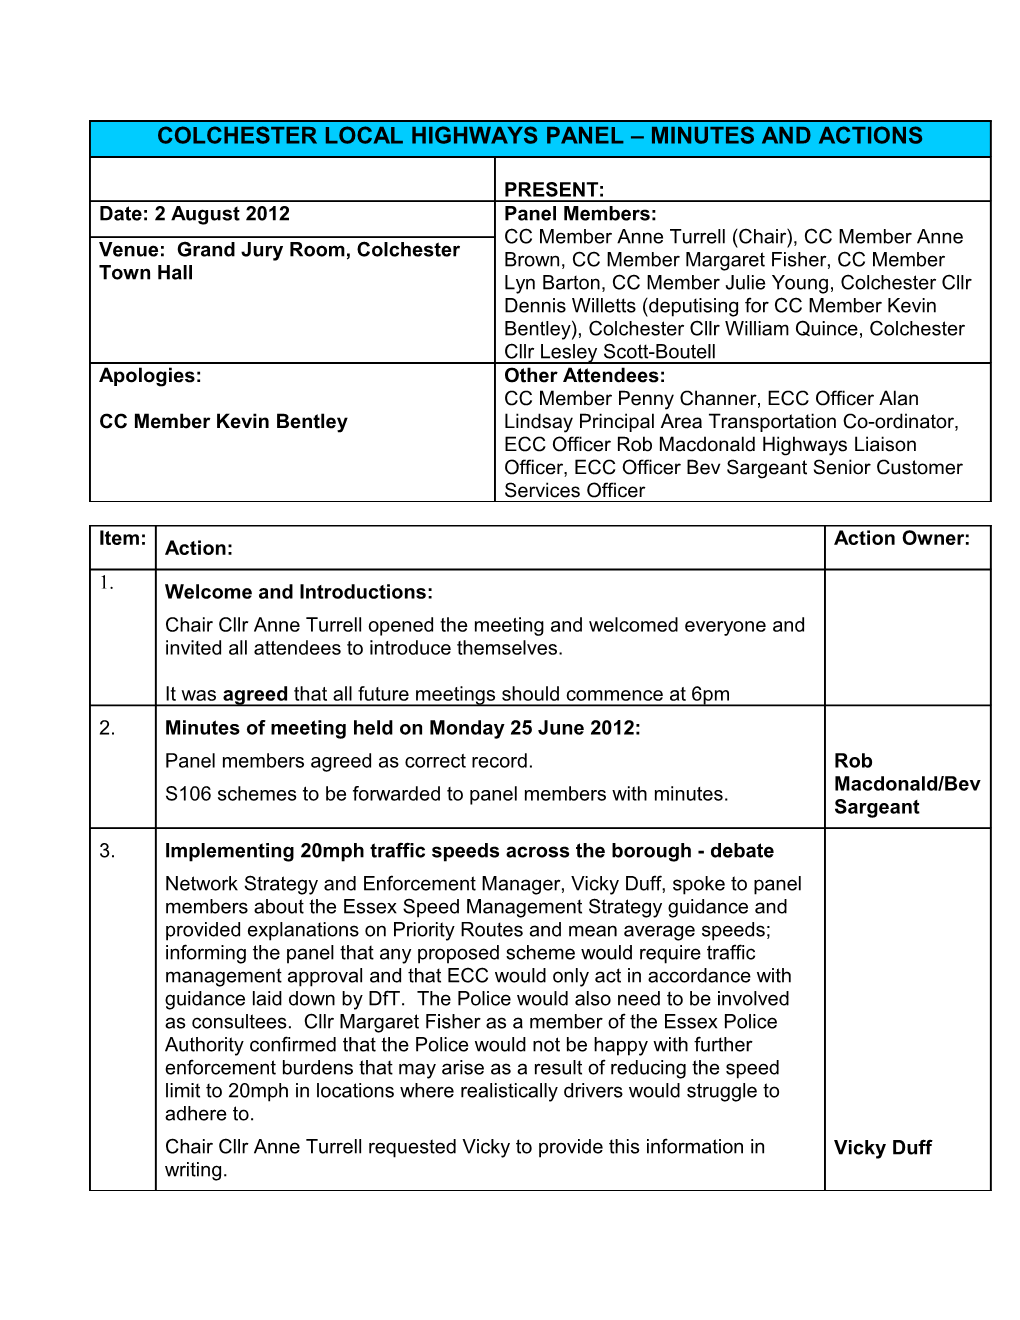 Colchester Local Highways Panel Minutes and Actions